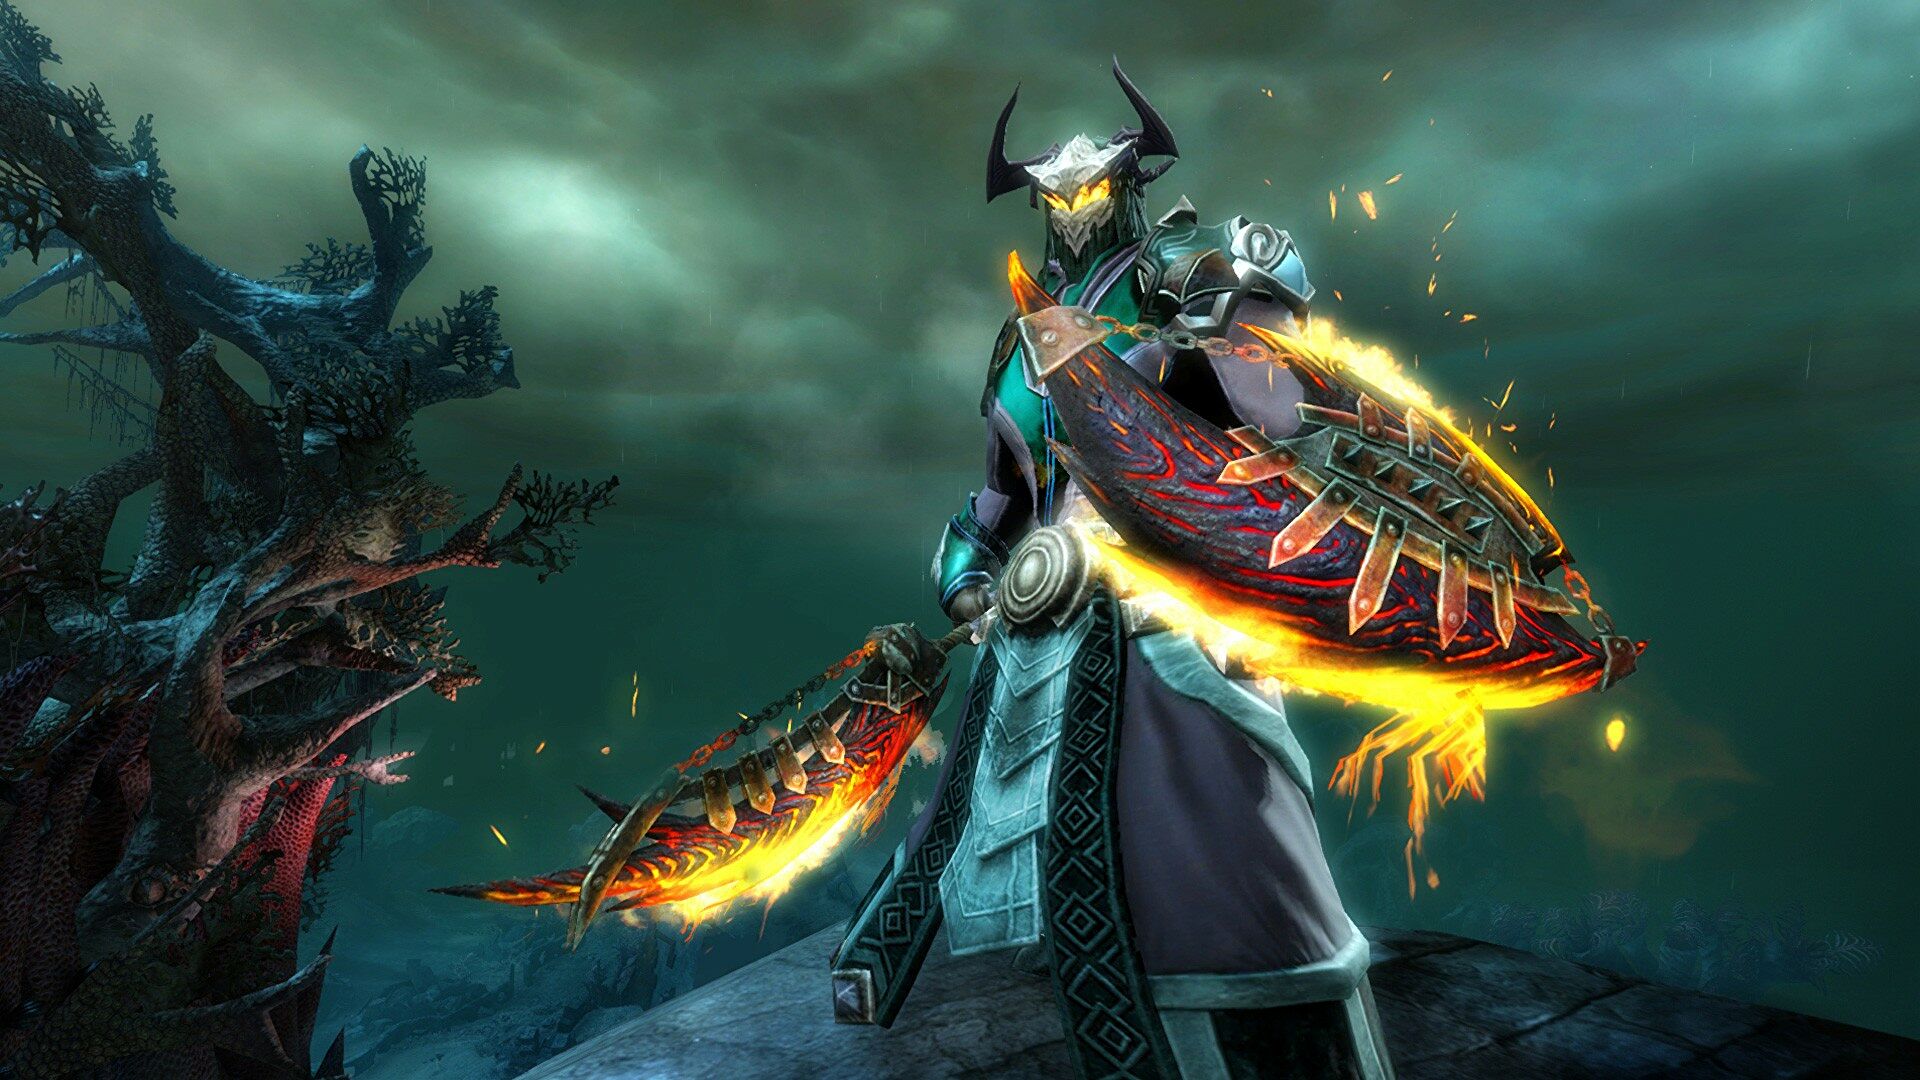 Guild Wars 2 rides its dragon onto Steam on August 23rd